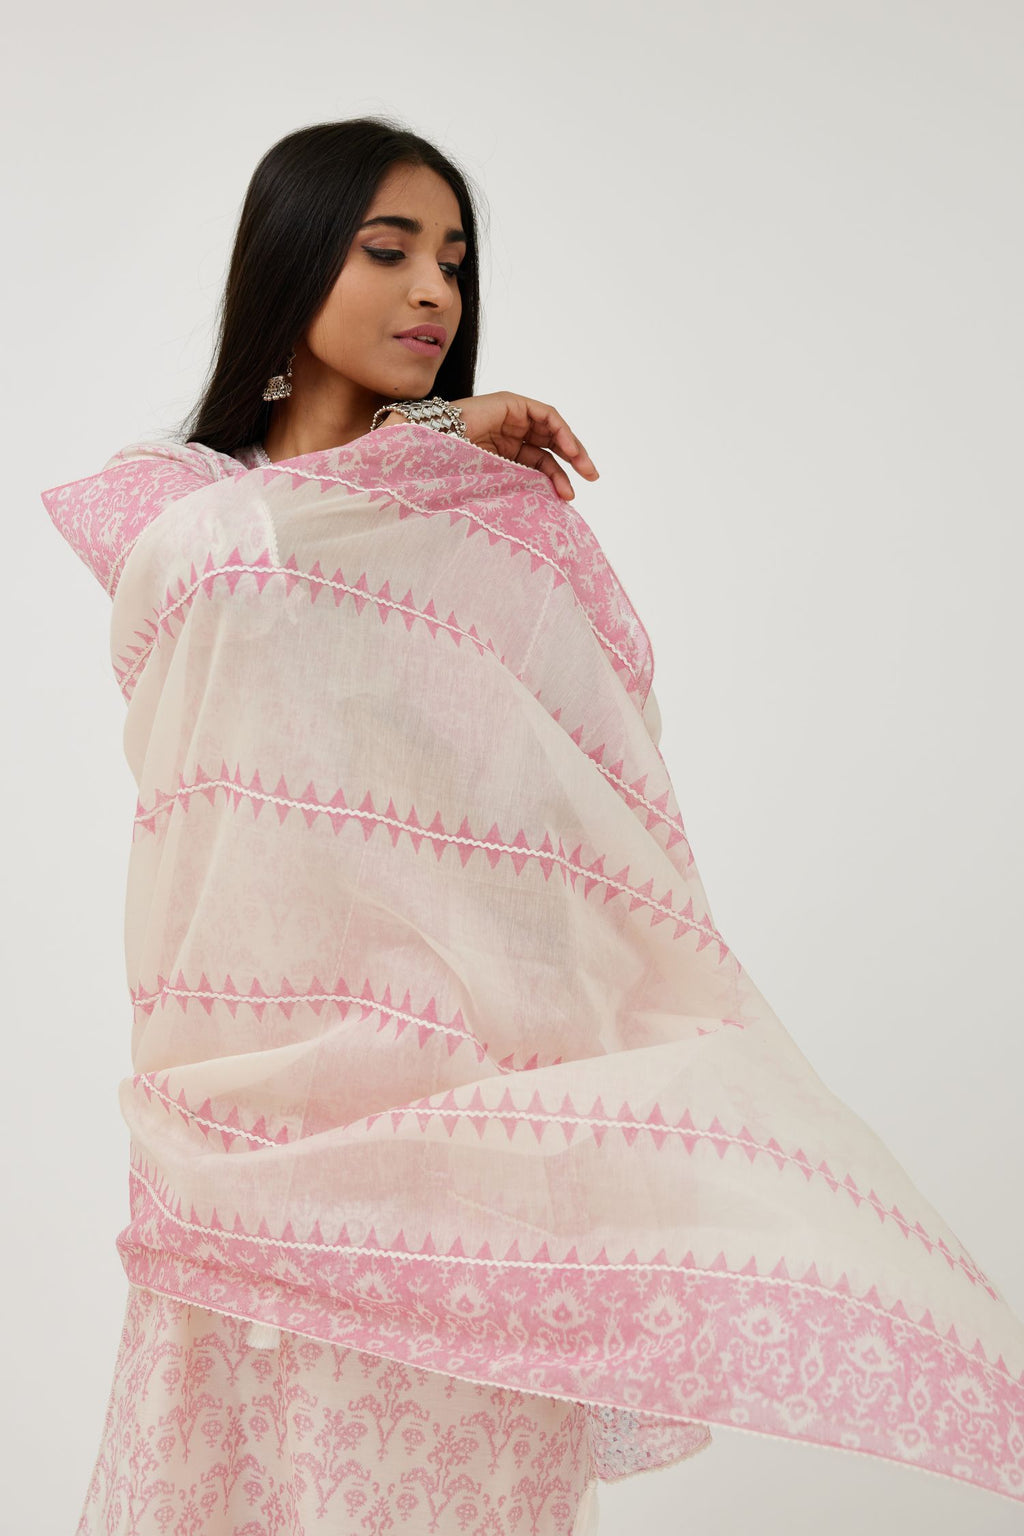 Cotton Chanderi Ikat hand block printed Dupatta with border and stripes in print.